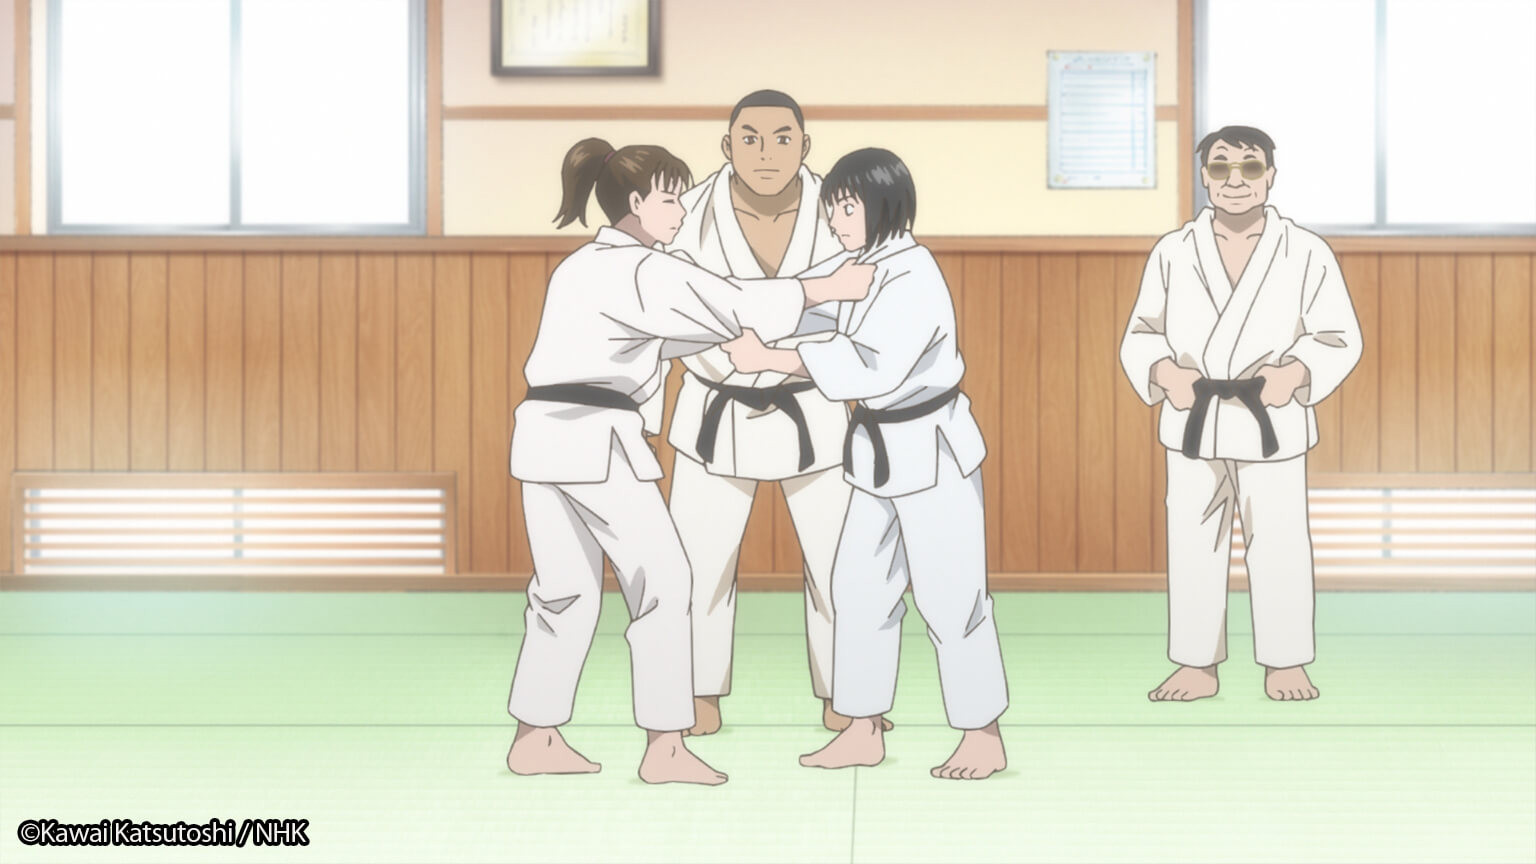 Ippon” again! - Judo Anime Series Review - DoubleSama